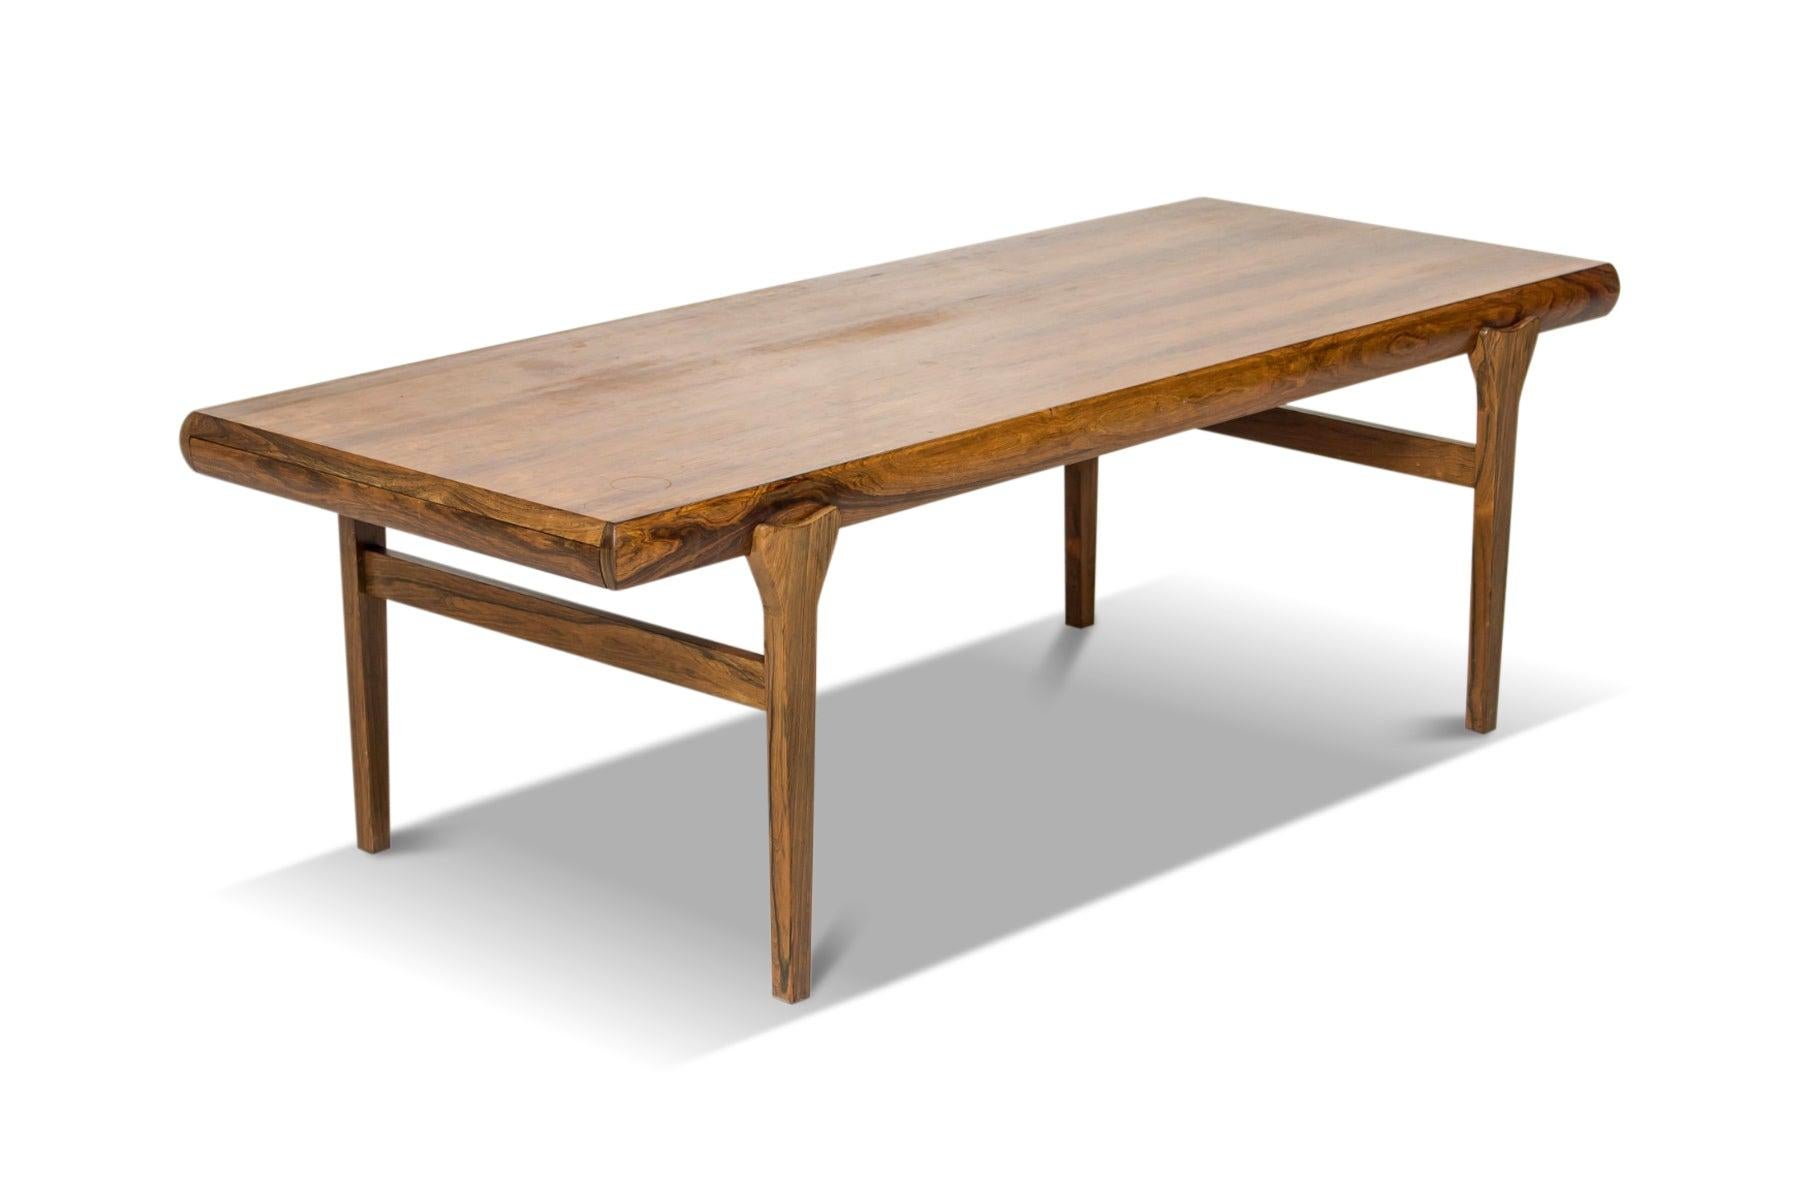 Johannes Andersen Rosewood Coffee Table with Drawers In Excellent Condition For Sale In Berkeley, CA